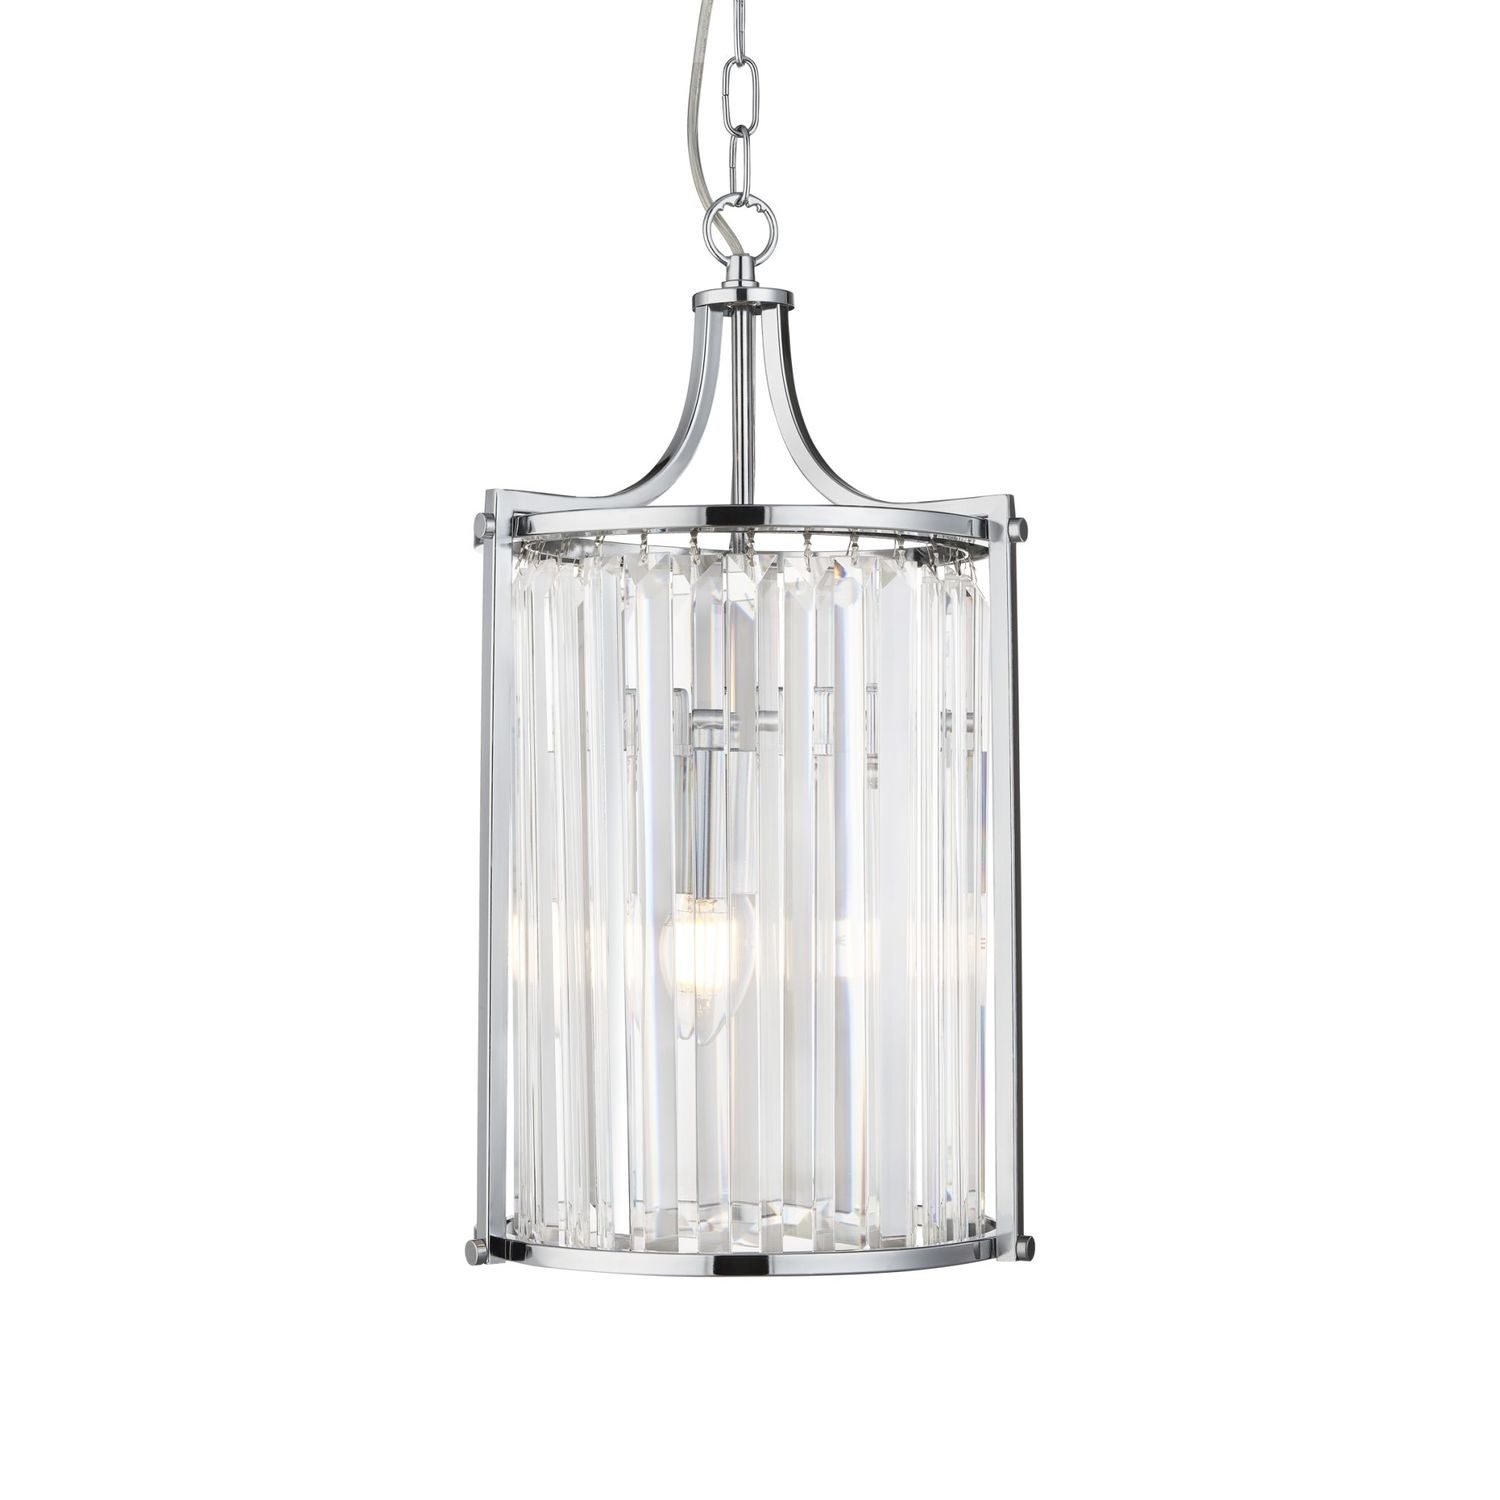 Chrome Pendant Light with Glass Crystals  Victoria